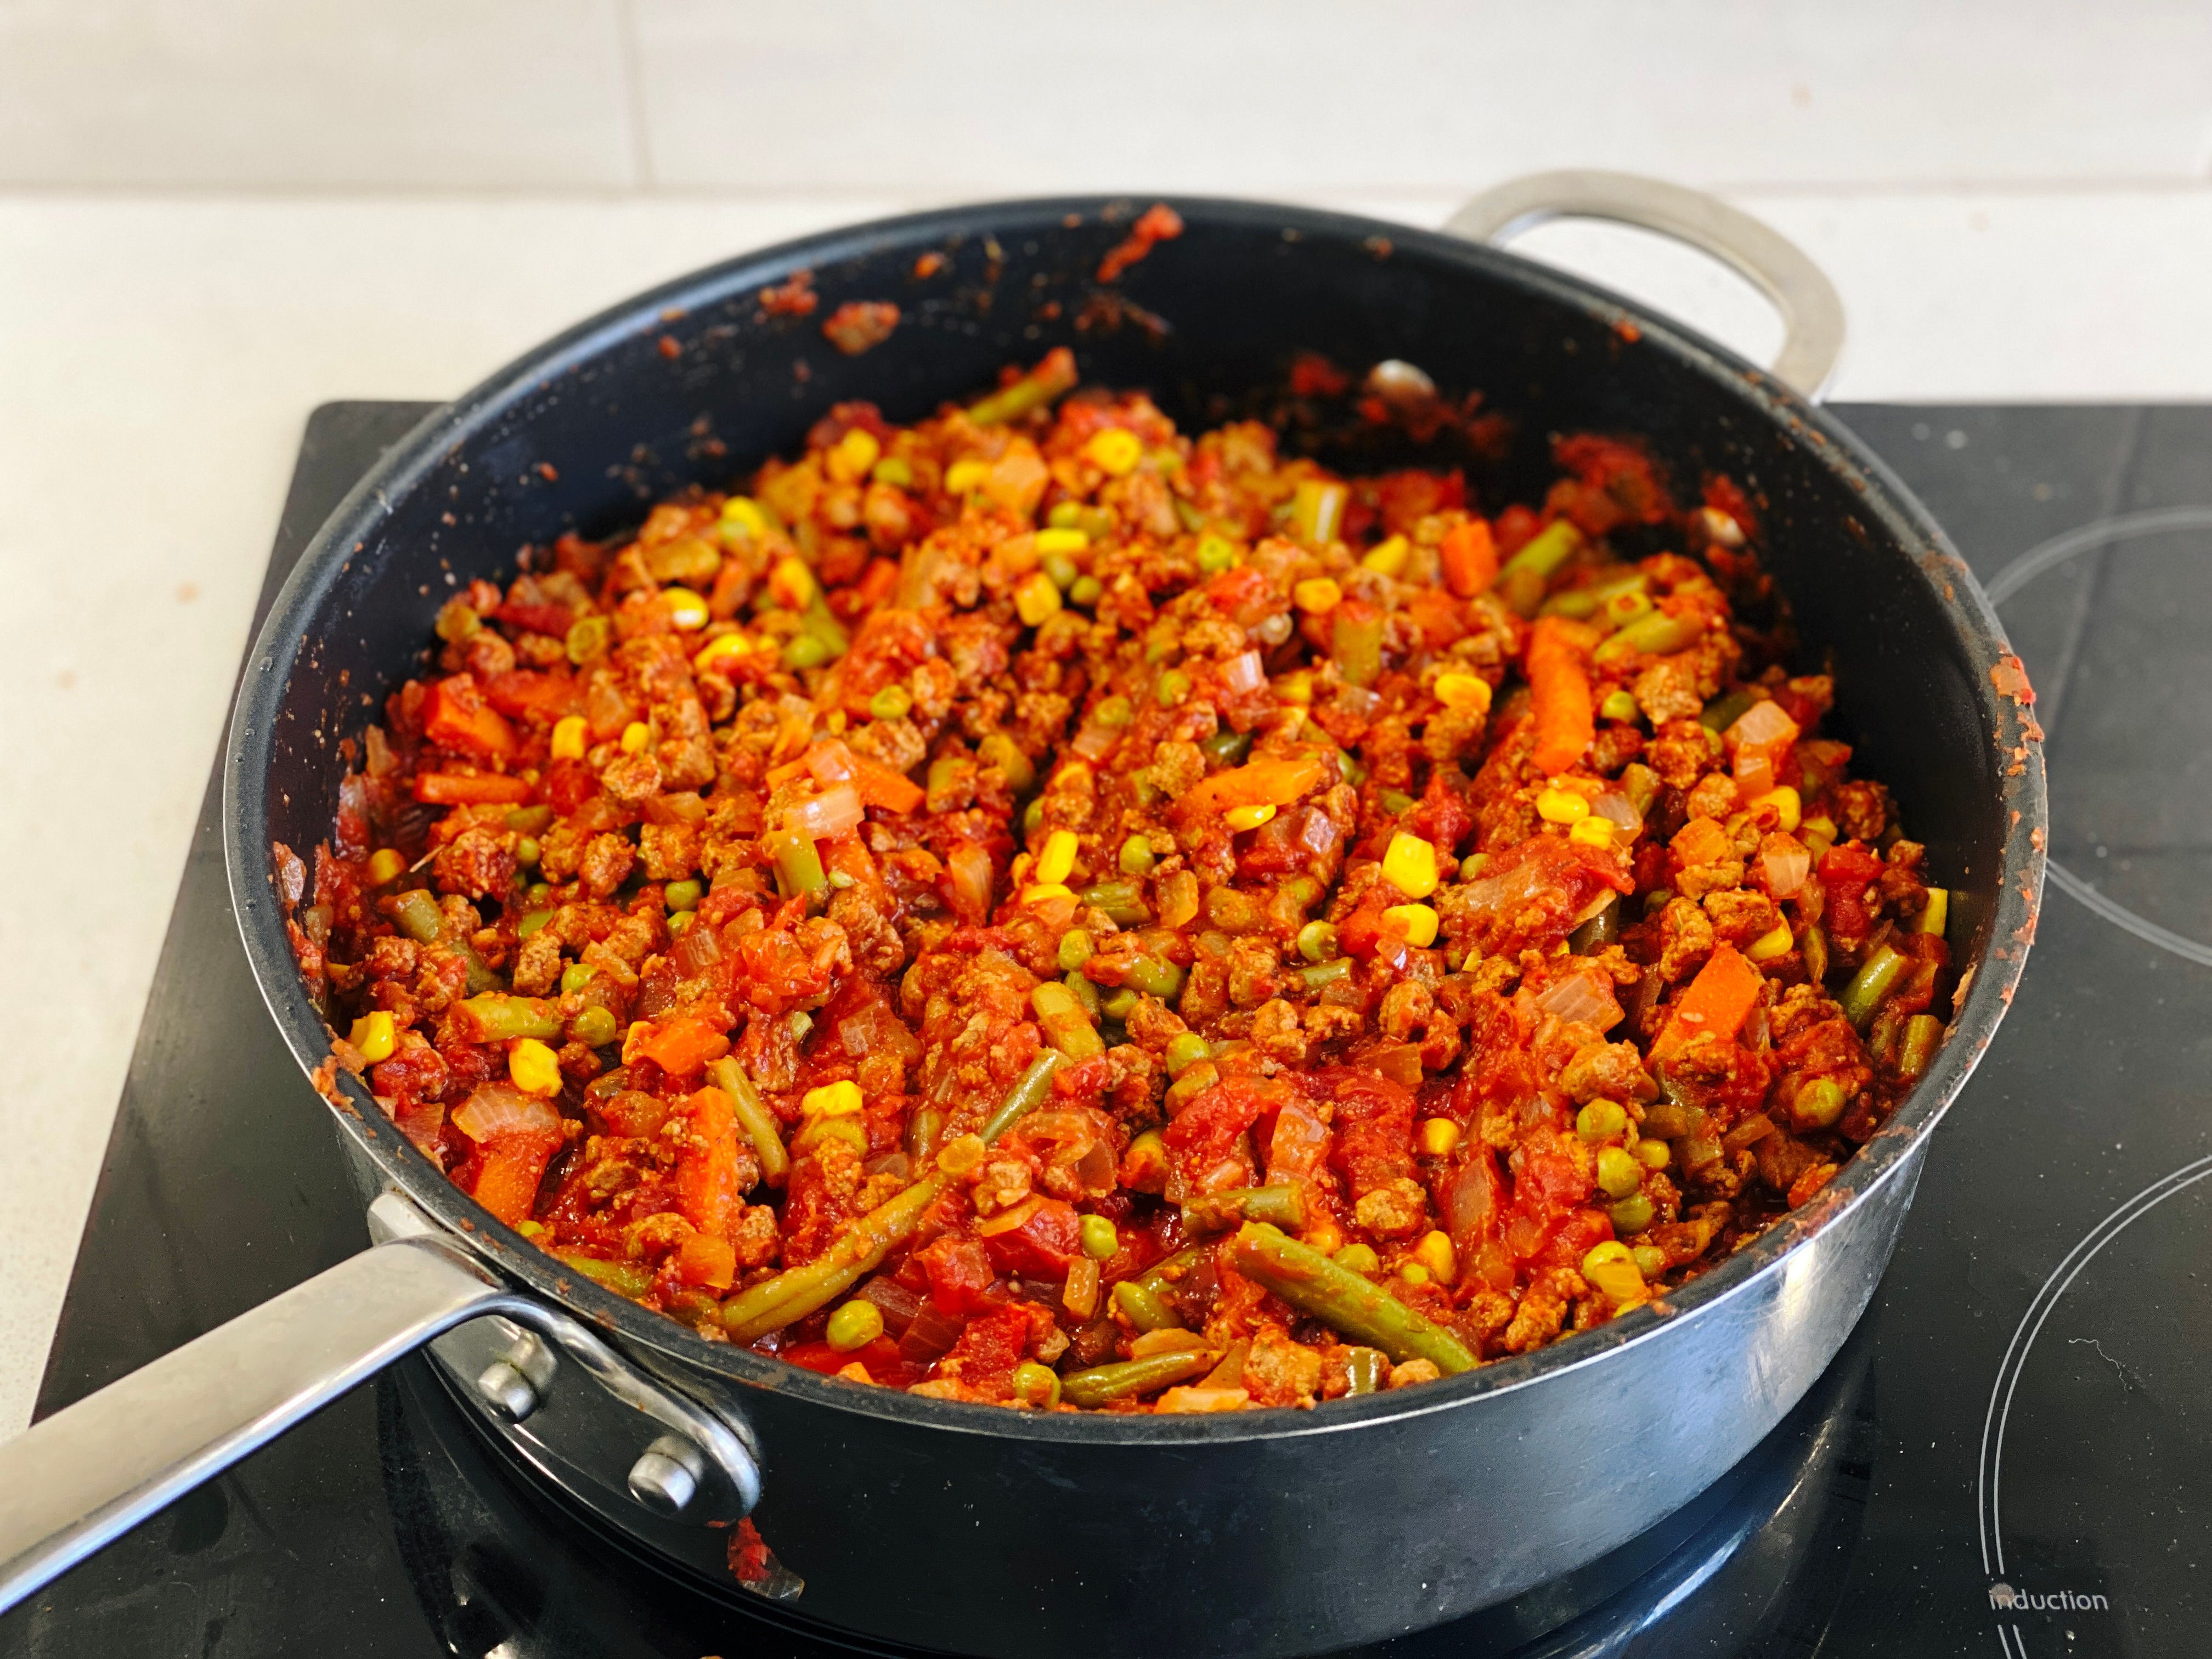 A big batch of vegetable bolognese sauce simmering in a large frying pan. There's diced onion, corn, peas, beans, and carrots in it as well as the Quorn (which looks pretty much just like beef mince).